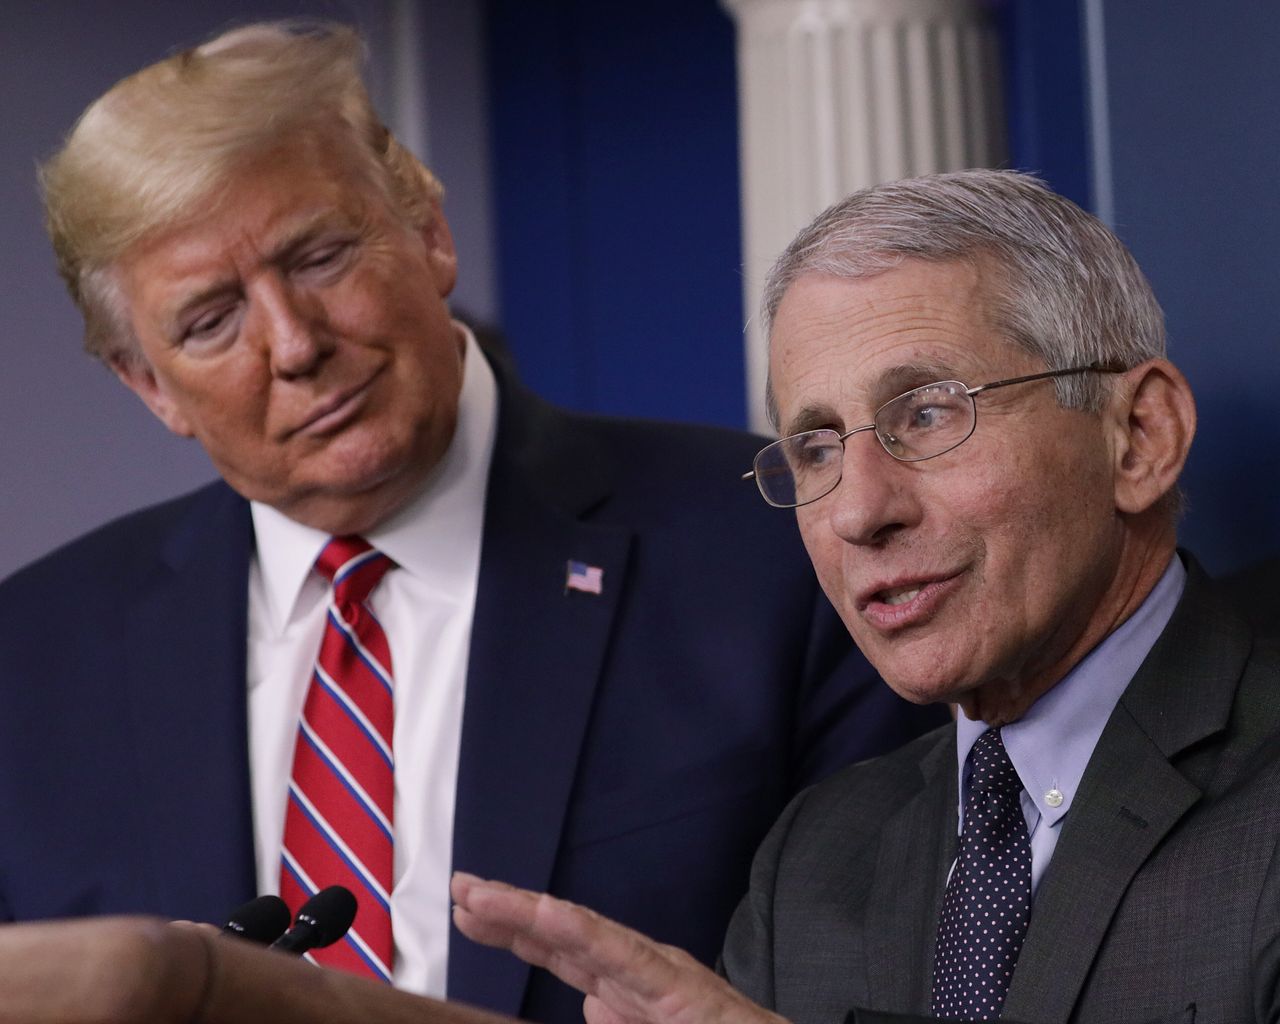 Donald Trump looks on as Dr Anthony Fauci, director of the National Institute of Allergy and Infectious Diseases, speaks during a press conference.